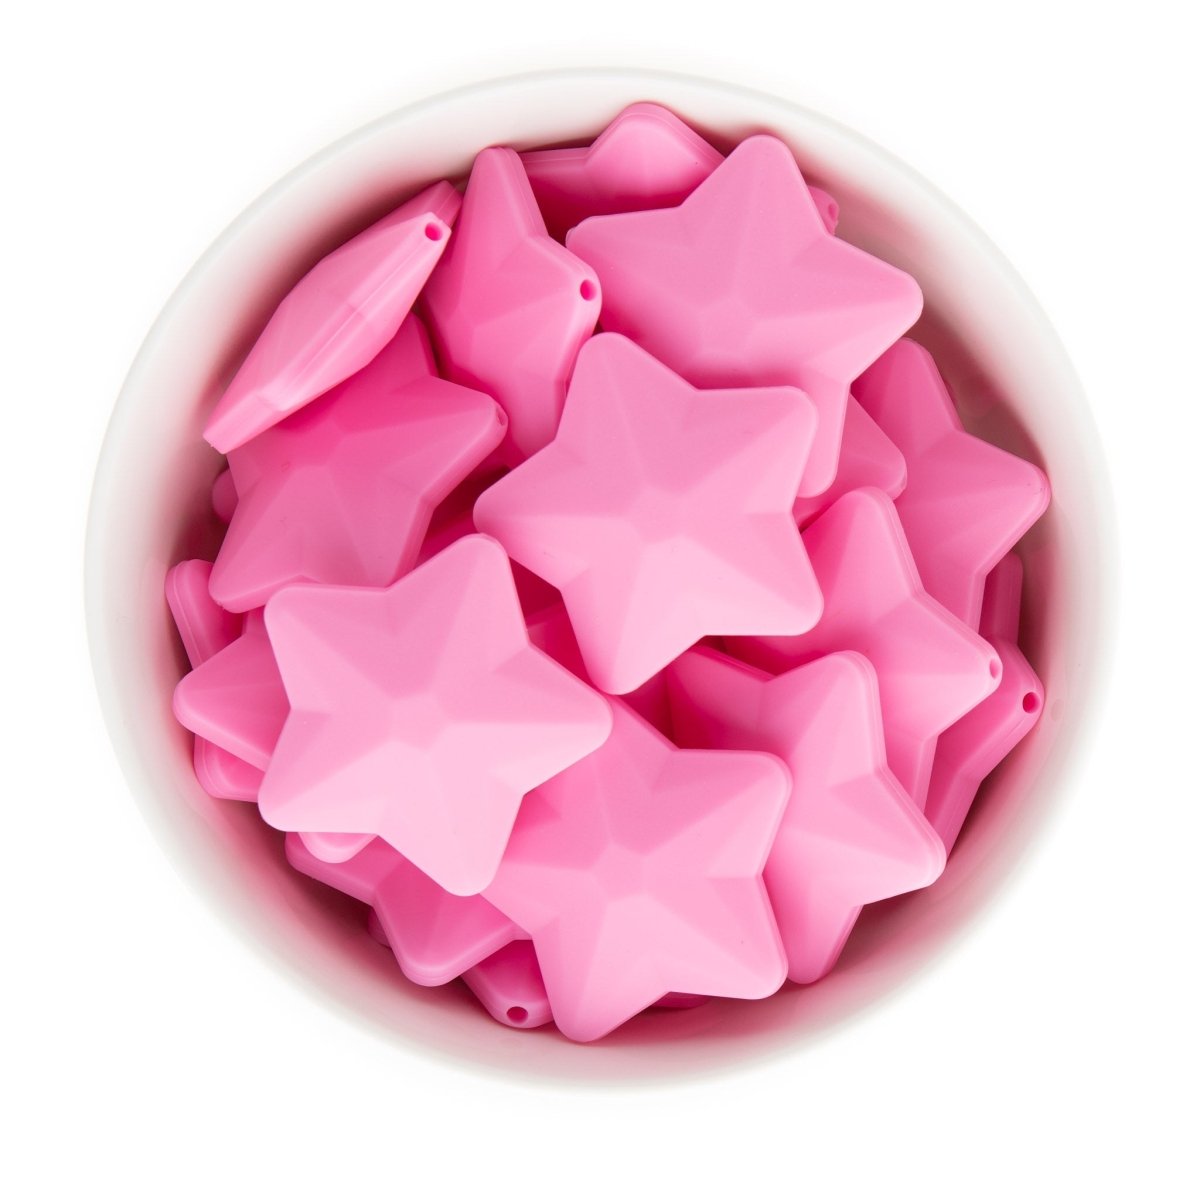 Silicone Shape Beads Faceted Stars Cotton Candy Pink from Cara & Co Craft Supply